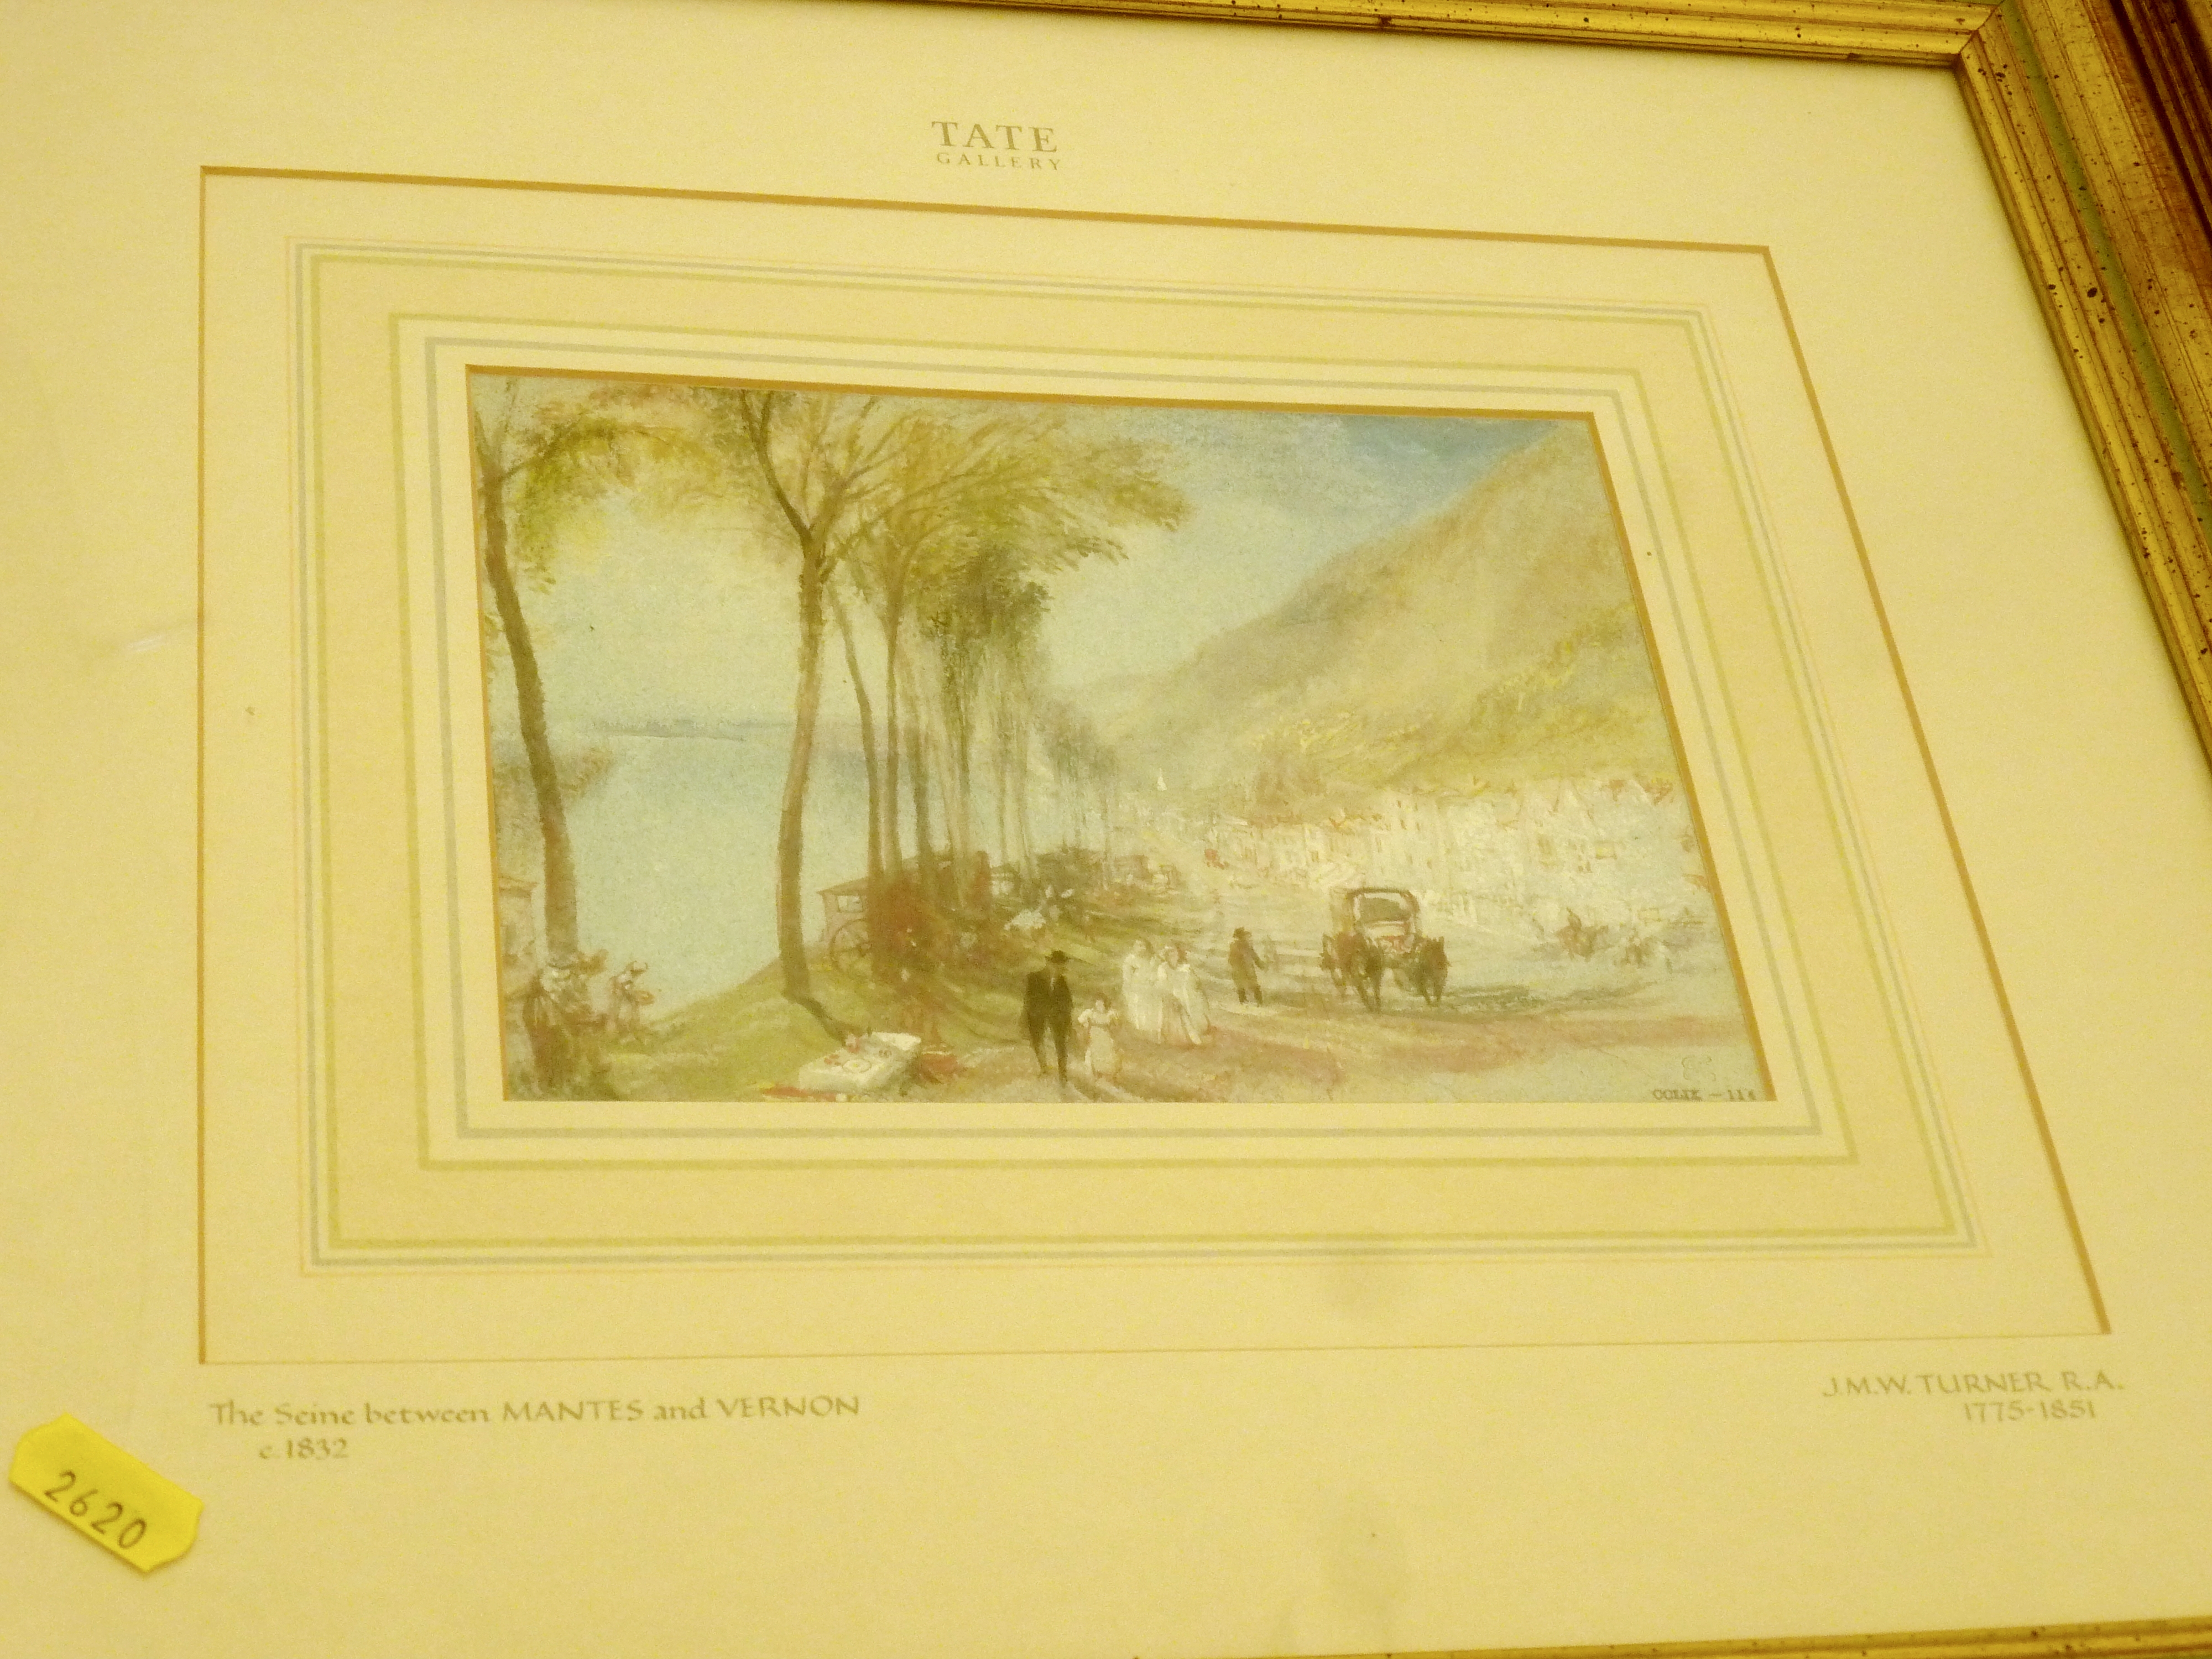 4 TATE GALLERY LIMITED EDITION J.M.W. TURNER 'WANDERINGS BY THE SEINE' PRINTS 908/5000 APPROX 5. - Image 4 of 9